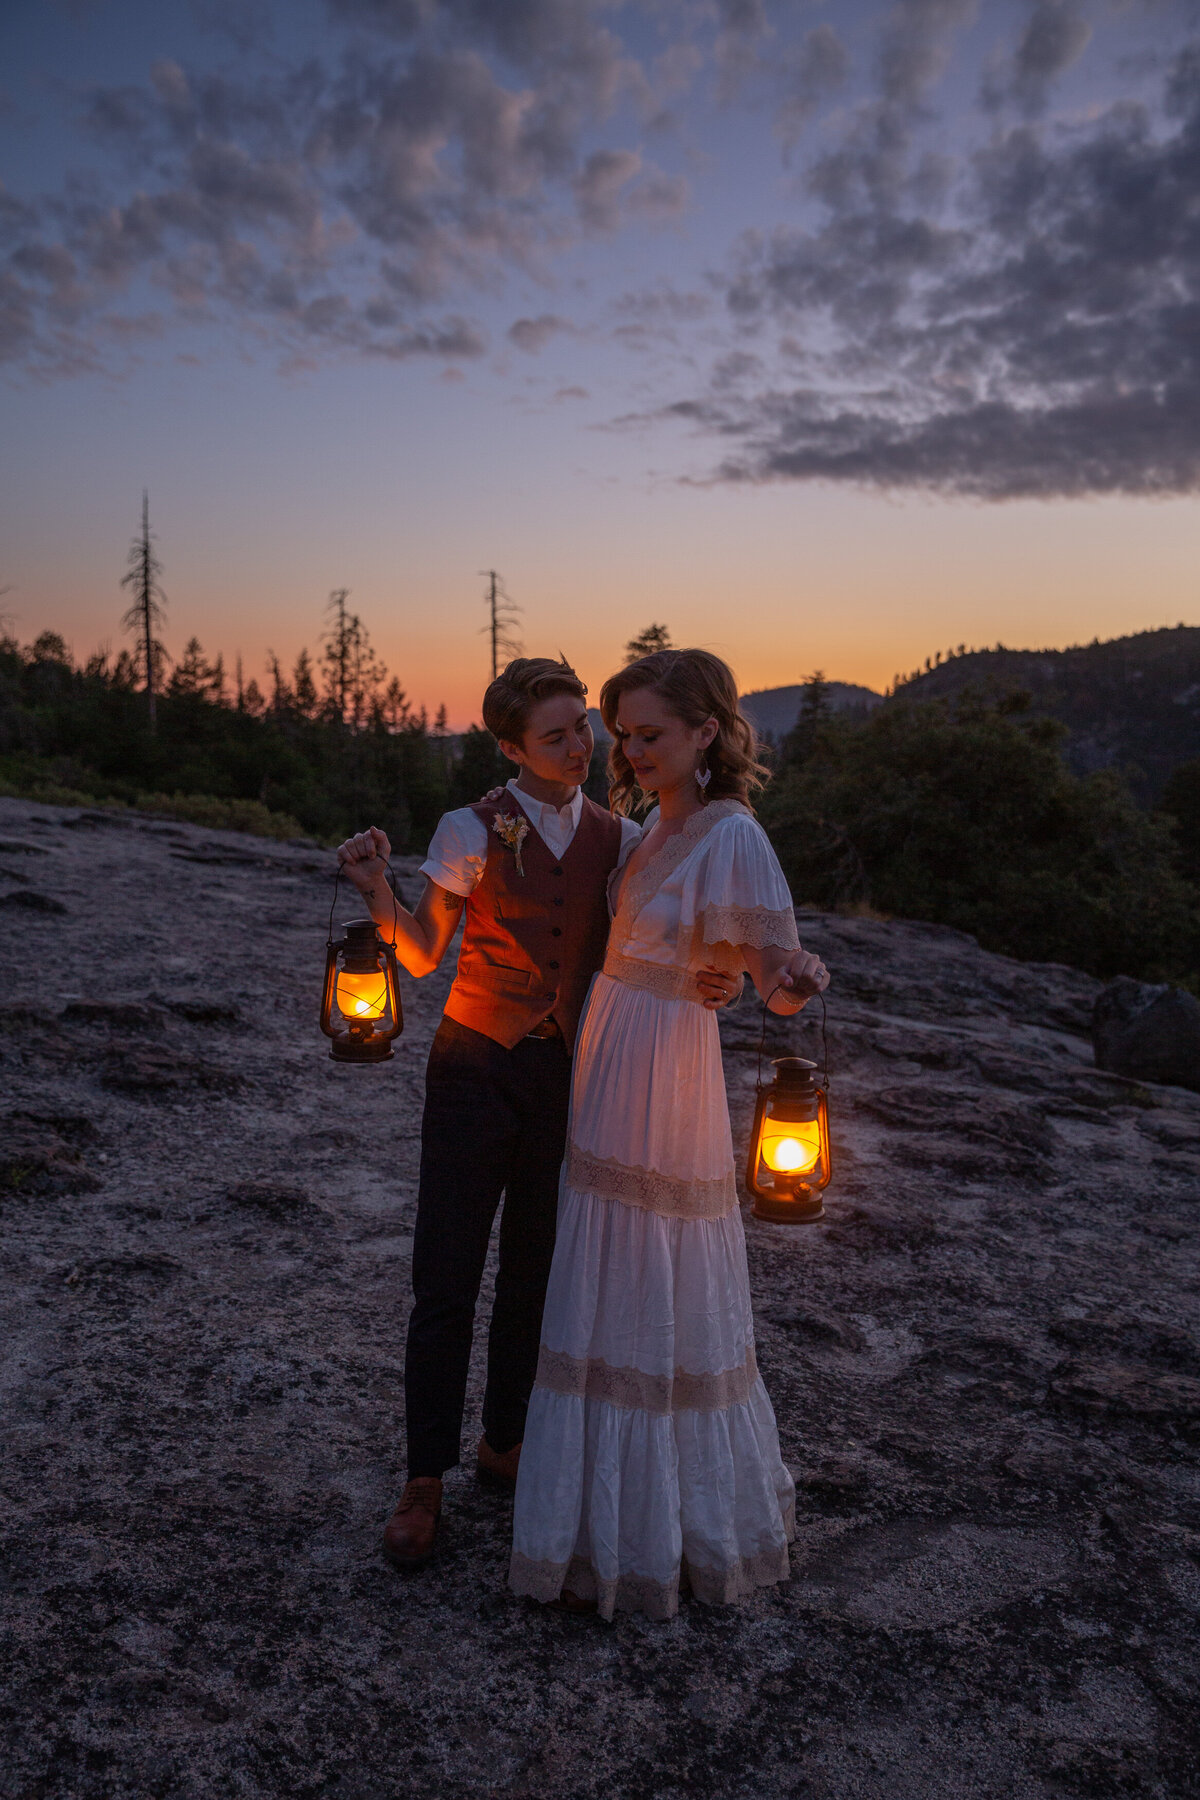 Two brides stand hugging each other while holding lanterns next to their bodies as the sunsets in Yosemite.